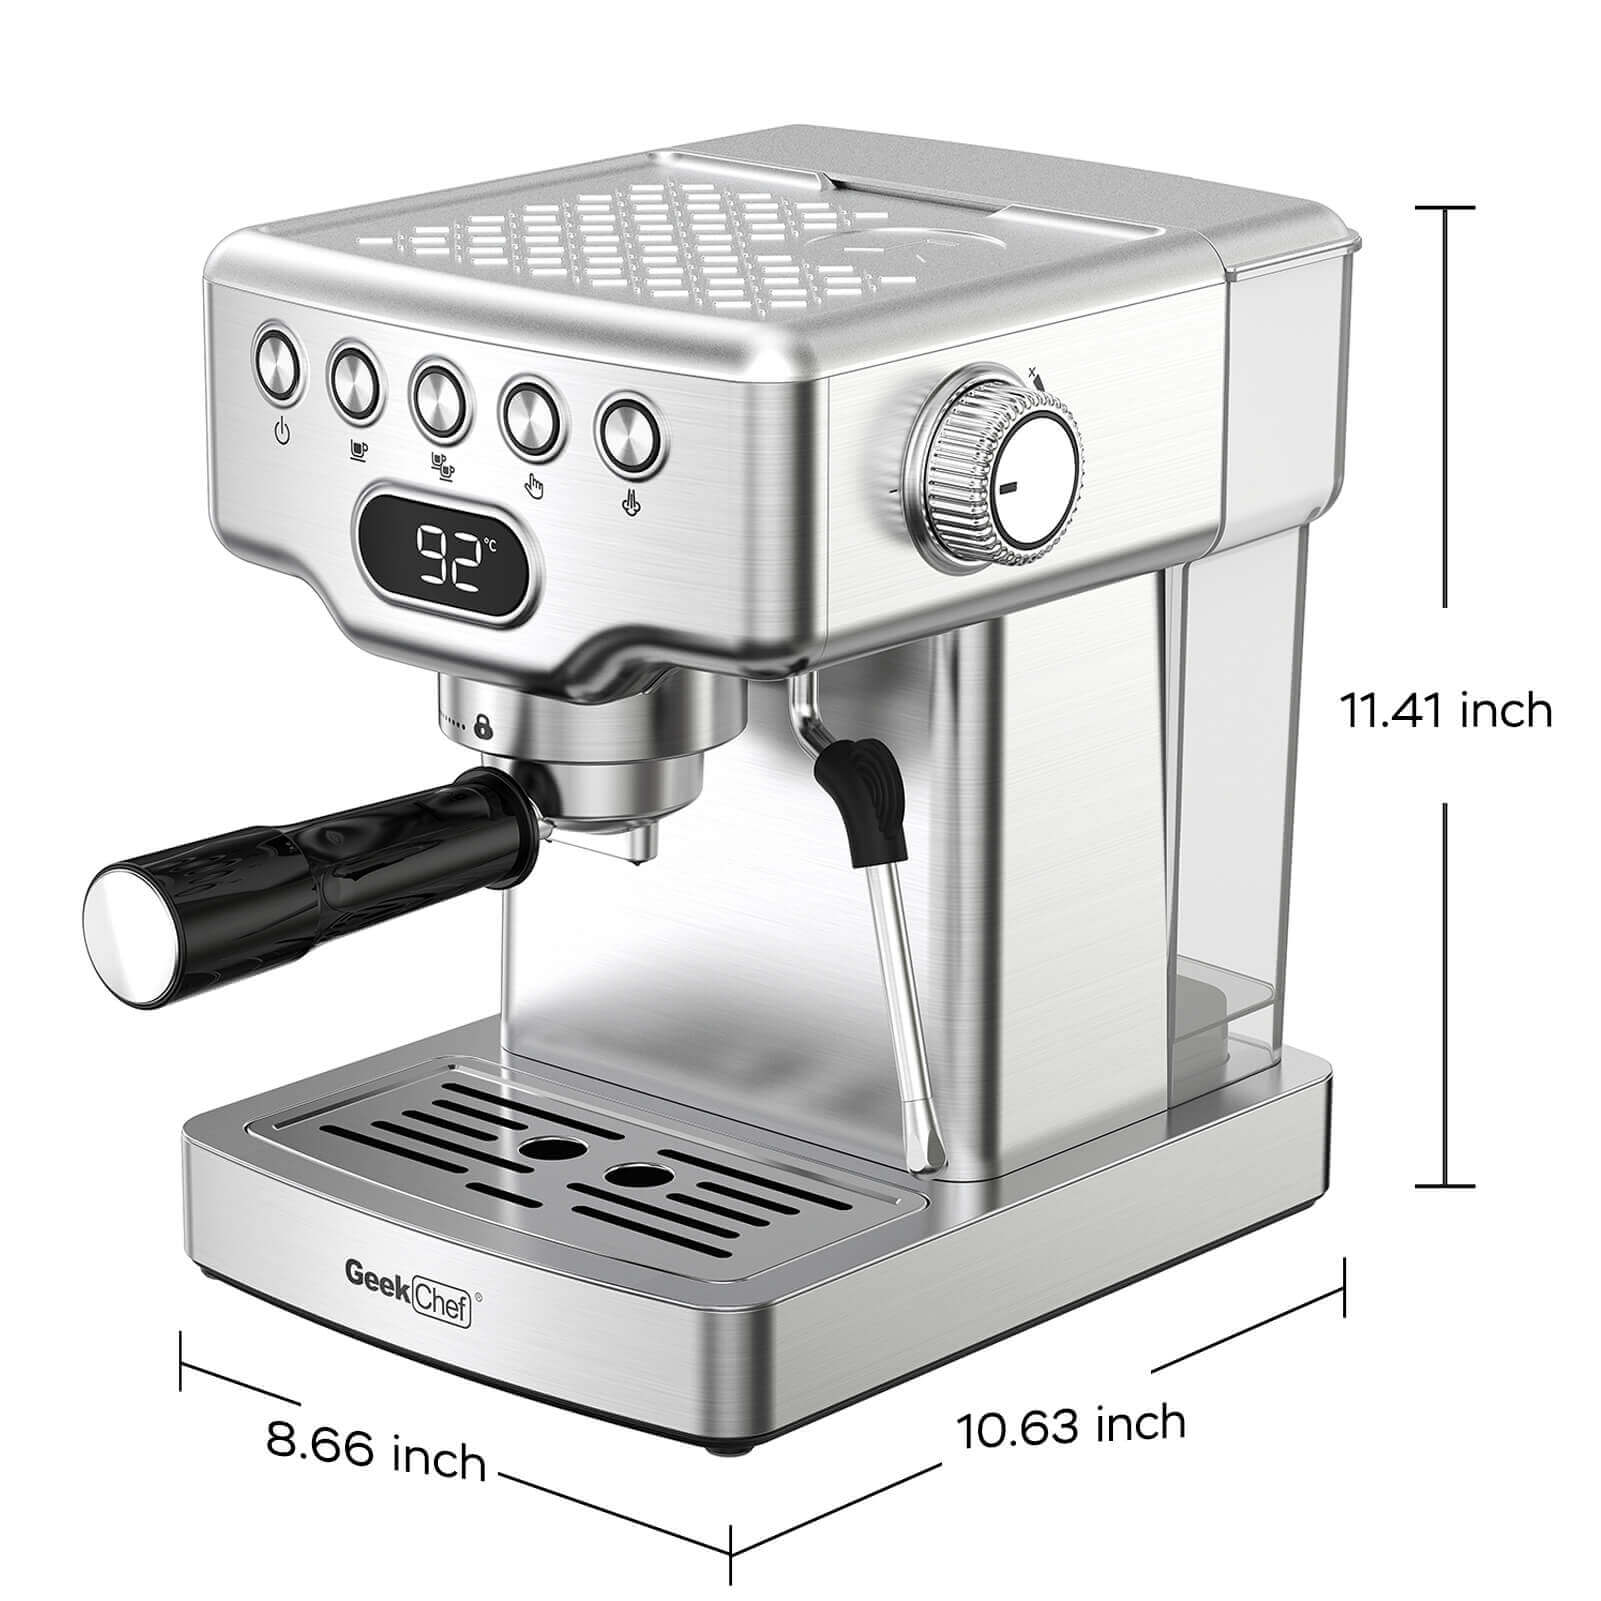 Geek Chef Espresso Machine, 20 Bar Espresso Maker with Milk Frother Steam  Wand, Compact Coffee Machine with for Cappuccino,Latte, Fast Heating